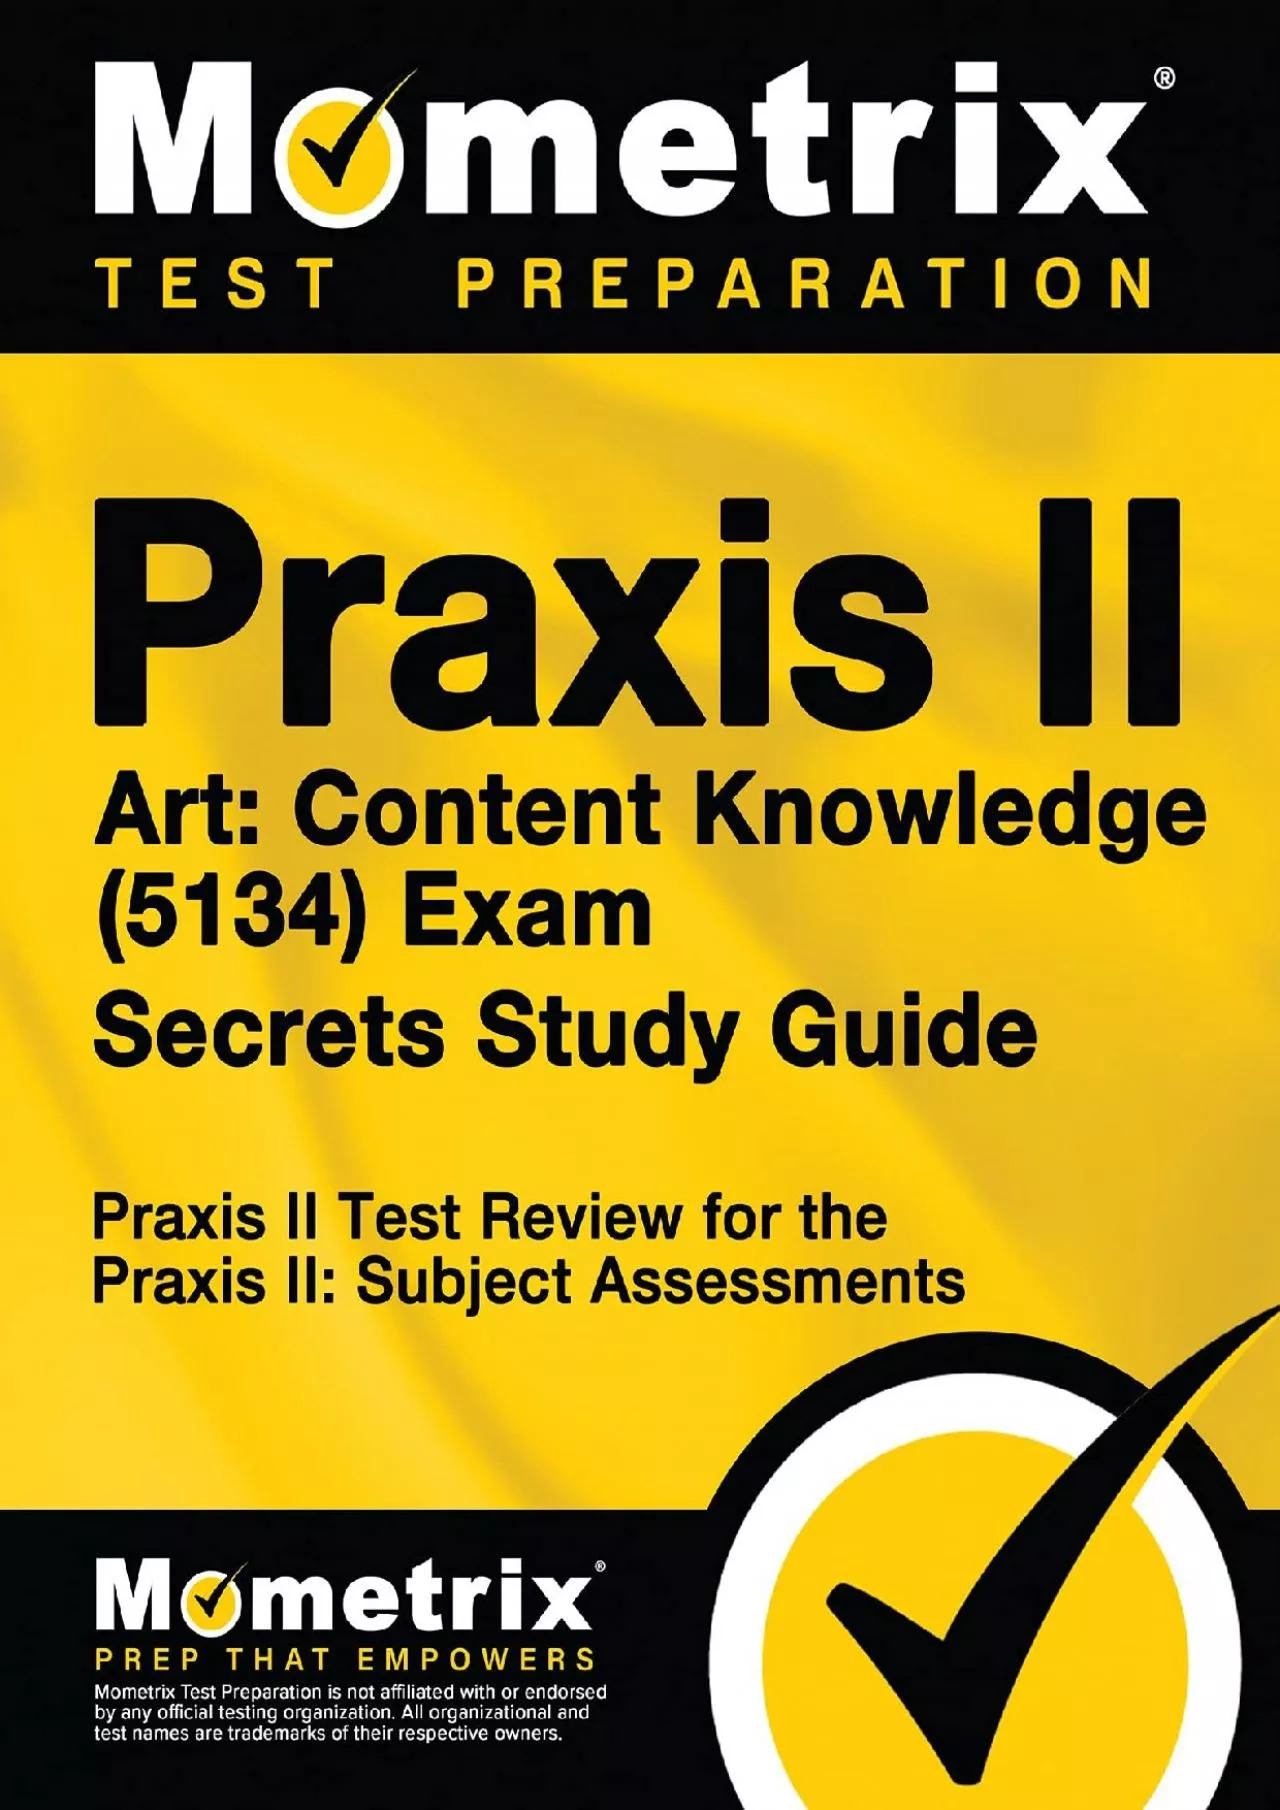 [DOWNLOAD] Praxis II Art: Content Knowledge 5134 Exam Secrets Study Guide: Praxis II Test